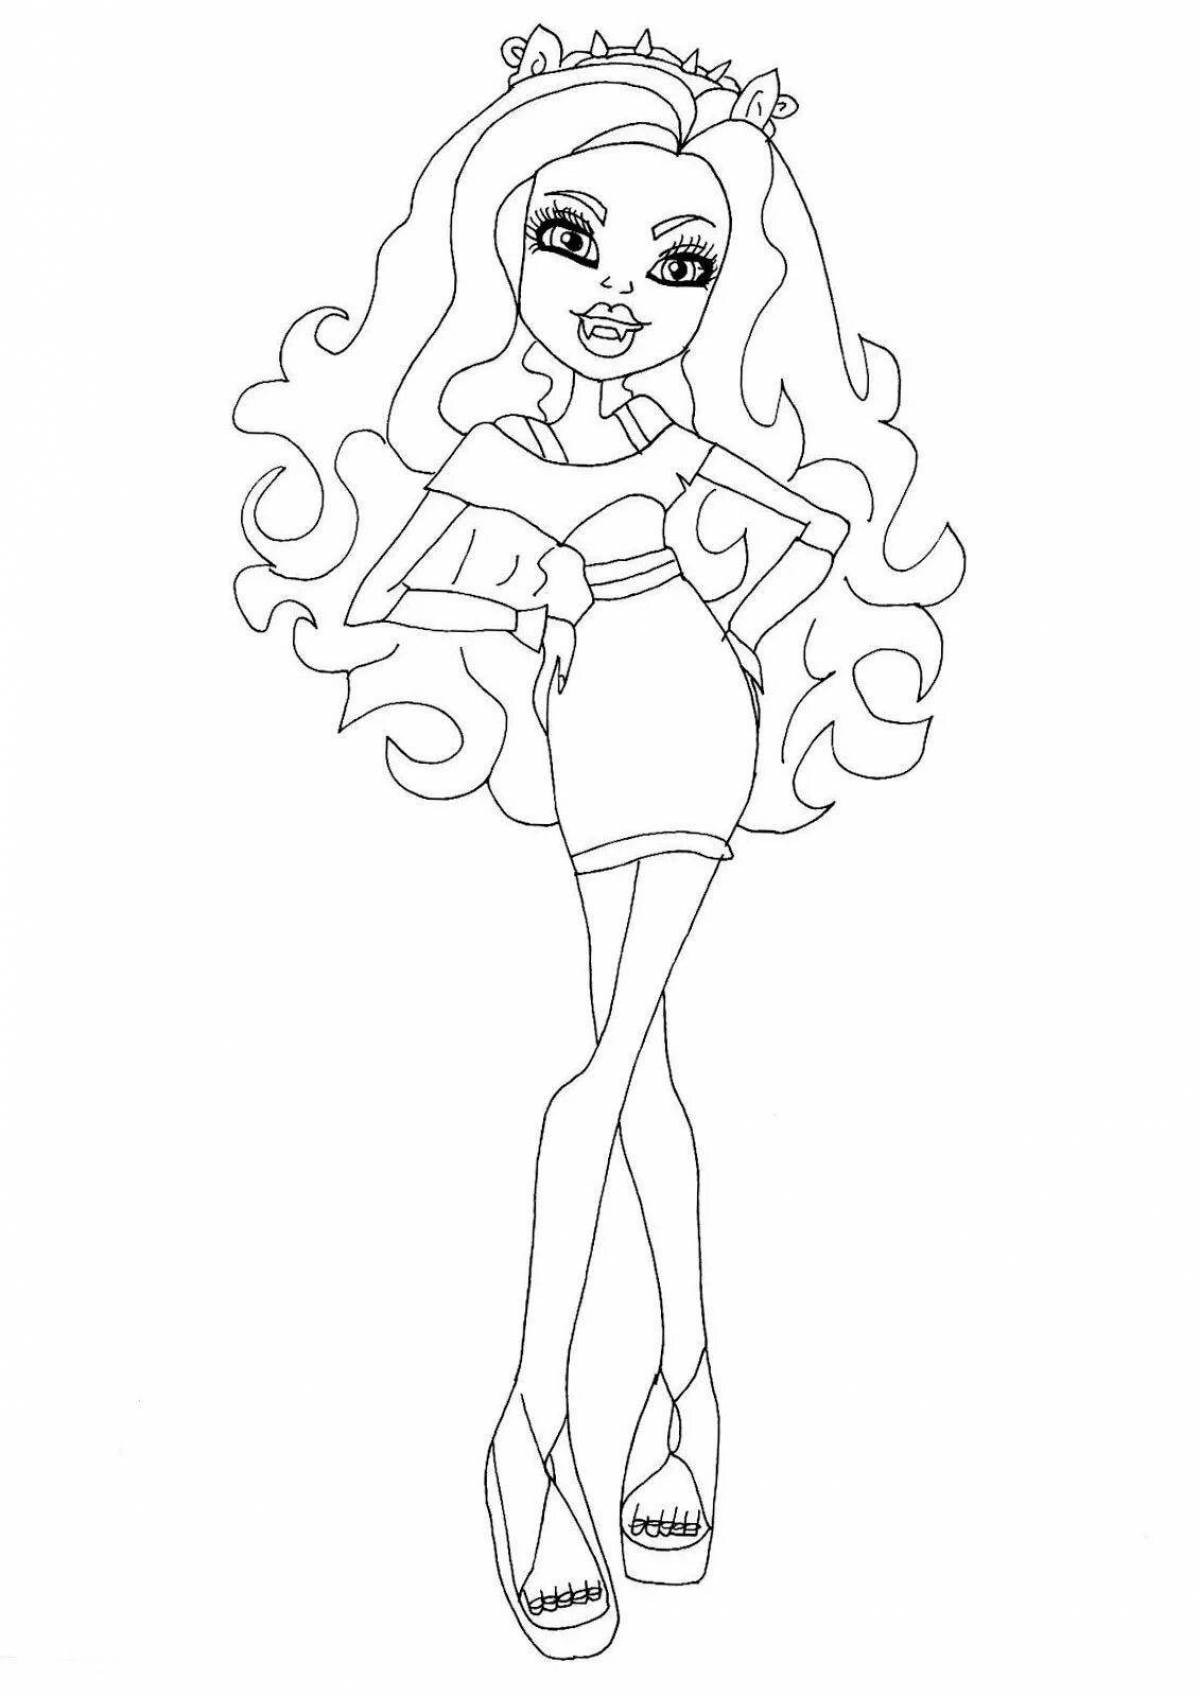 Monster high dolls dazzling coloring